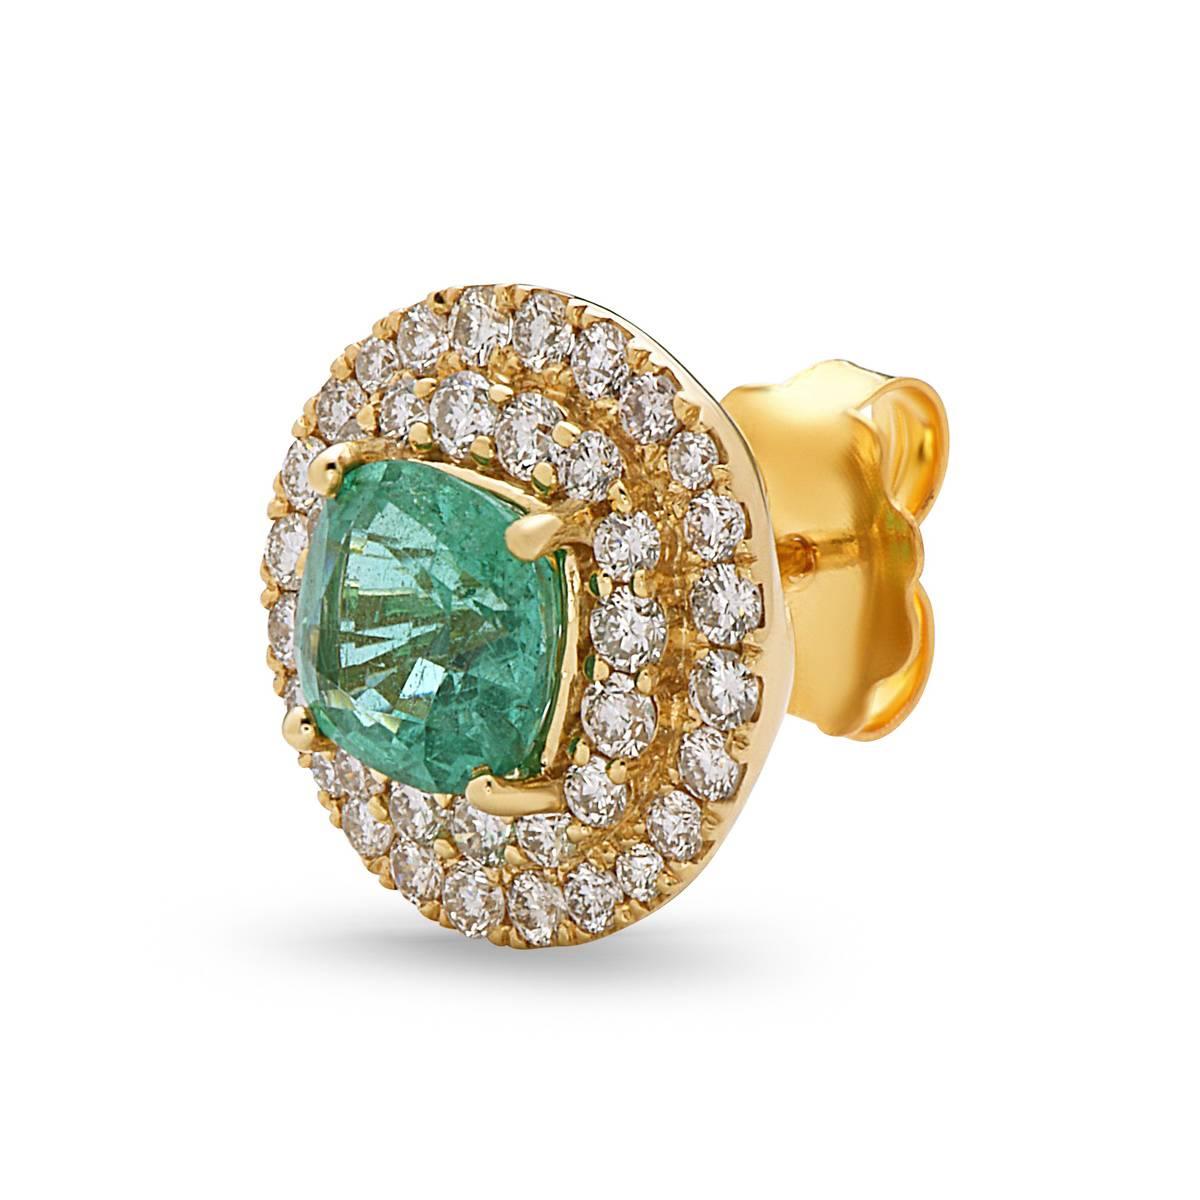 Art Deco 3.93ct Emerald Stud Earrings With Diamonds Made In 18k Gold For Sale